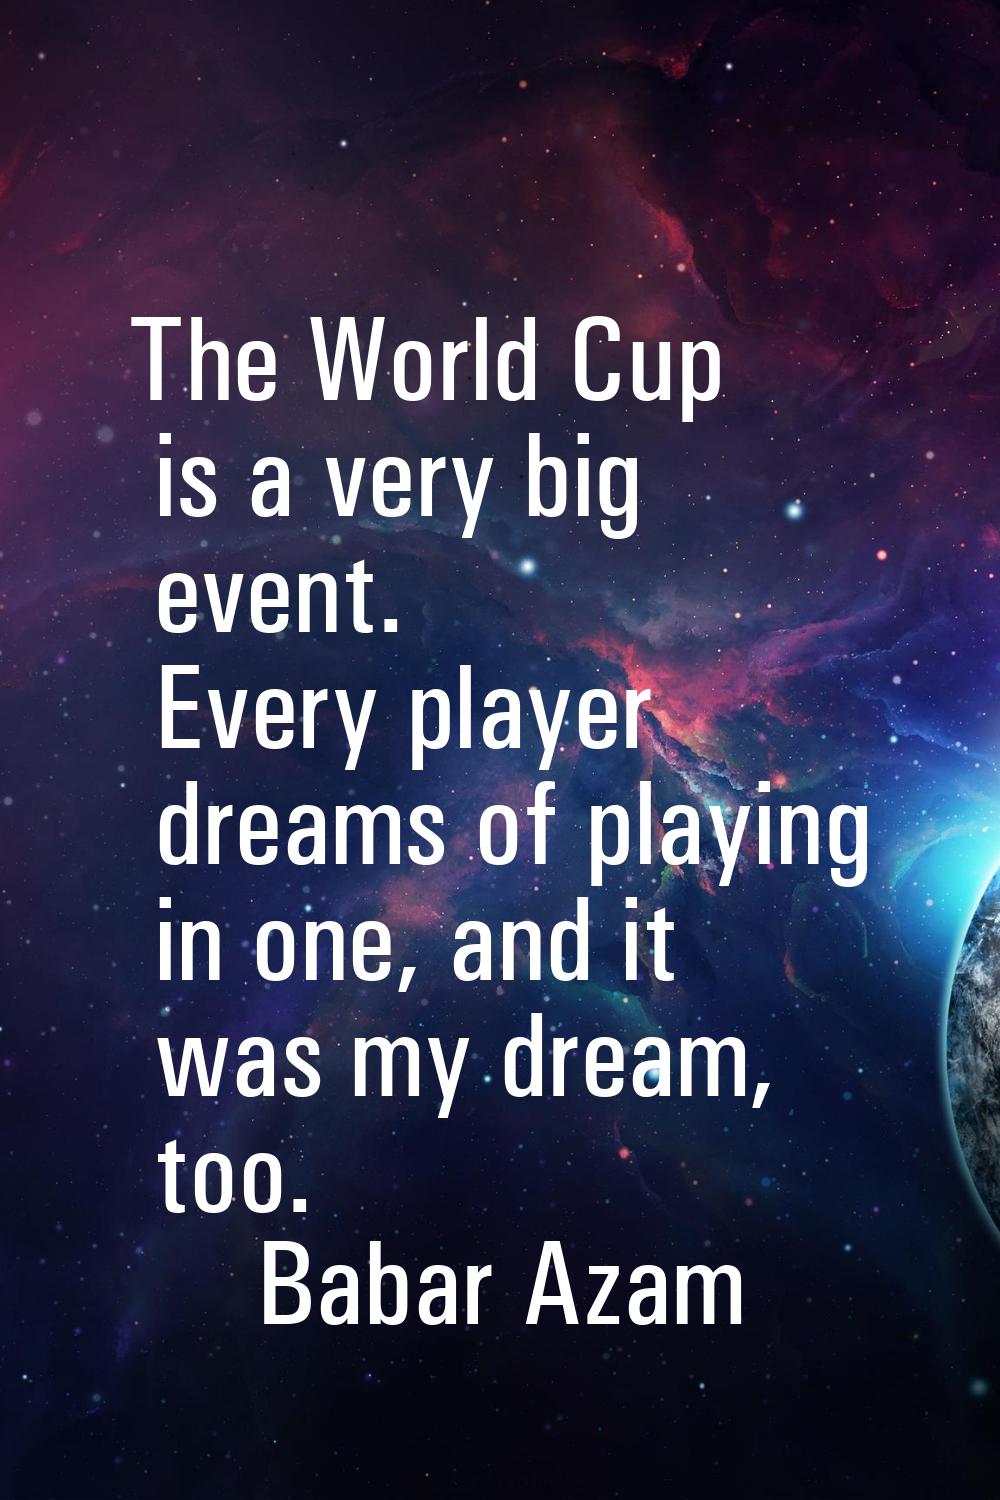 The World Cup is a very big event. Every player dreams of playing in one, and it was my dream, too.